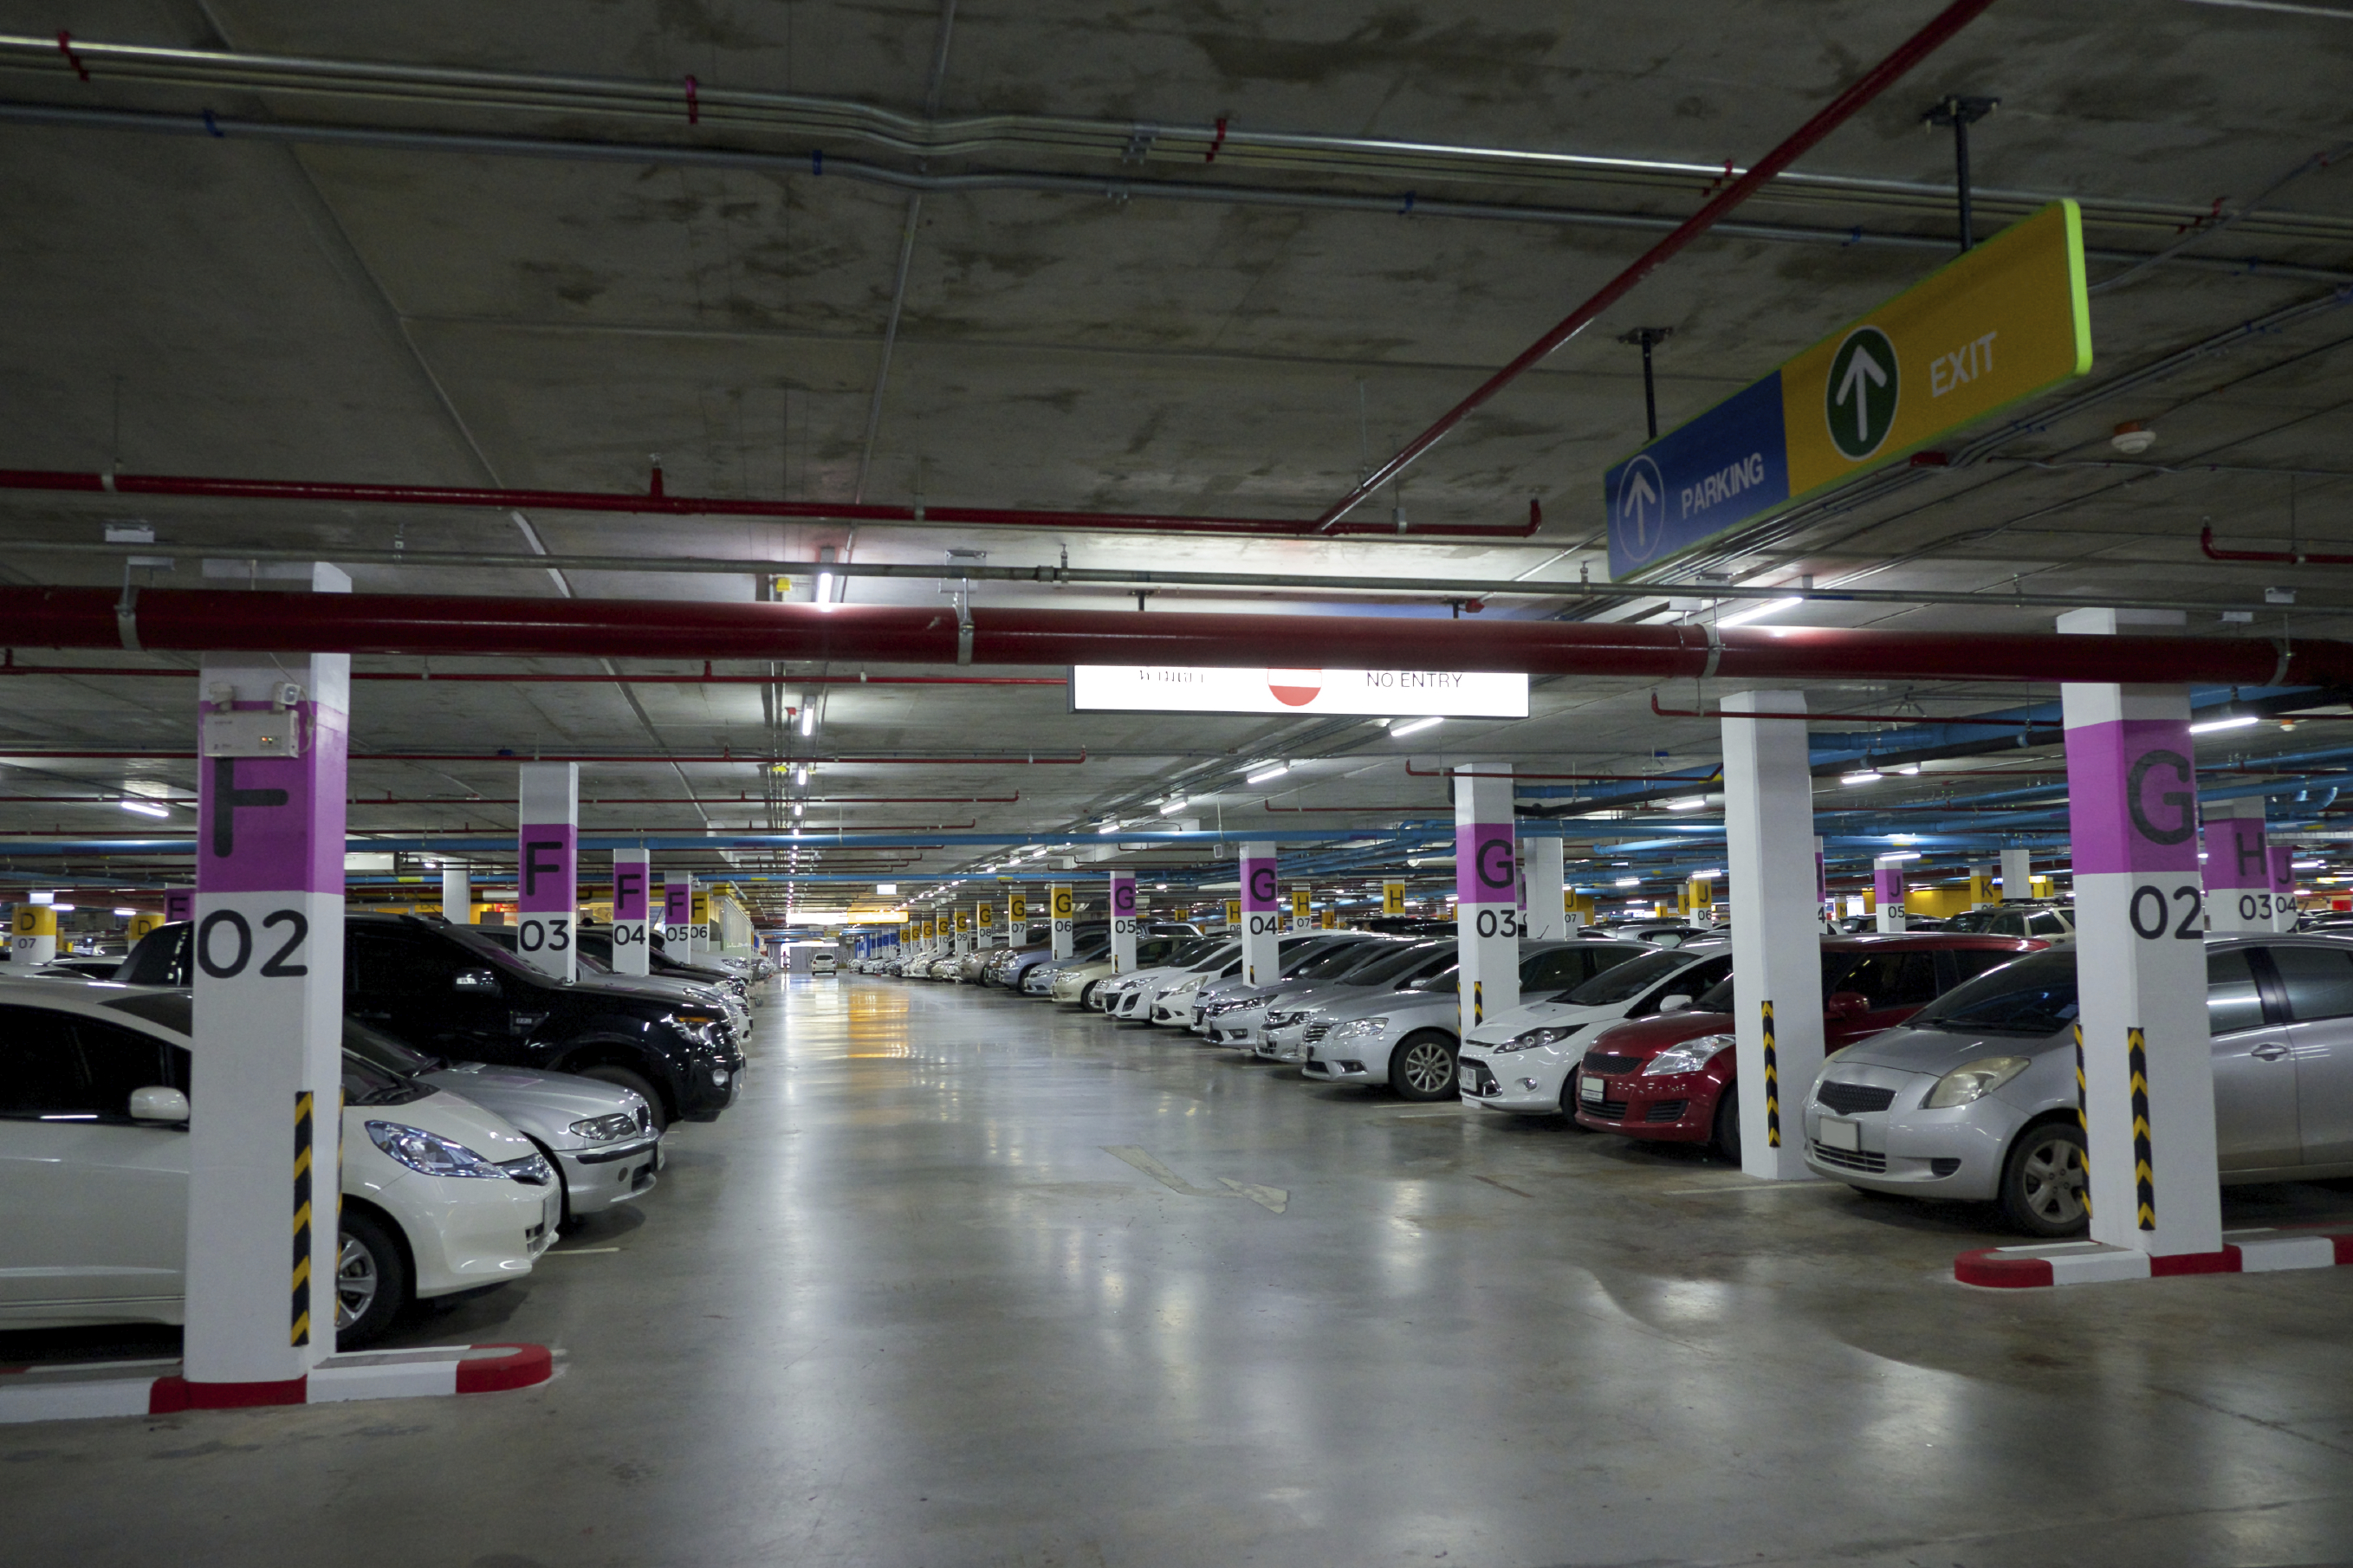 Retailers can now maintain full control of parking facilities without prohibiting drivers parking overnight.